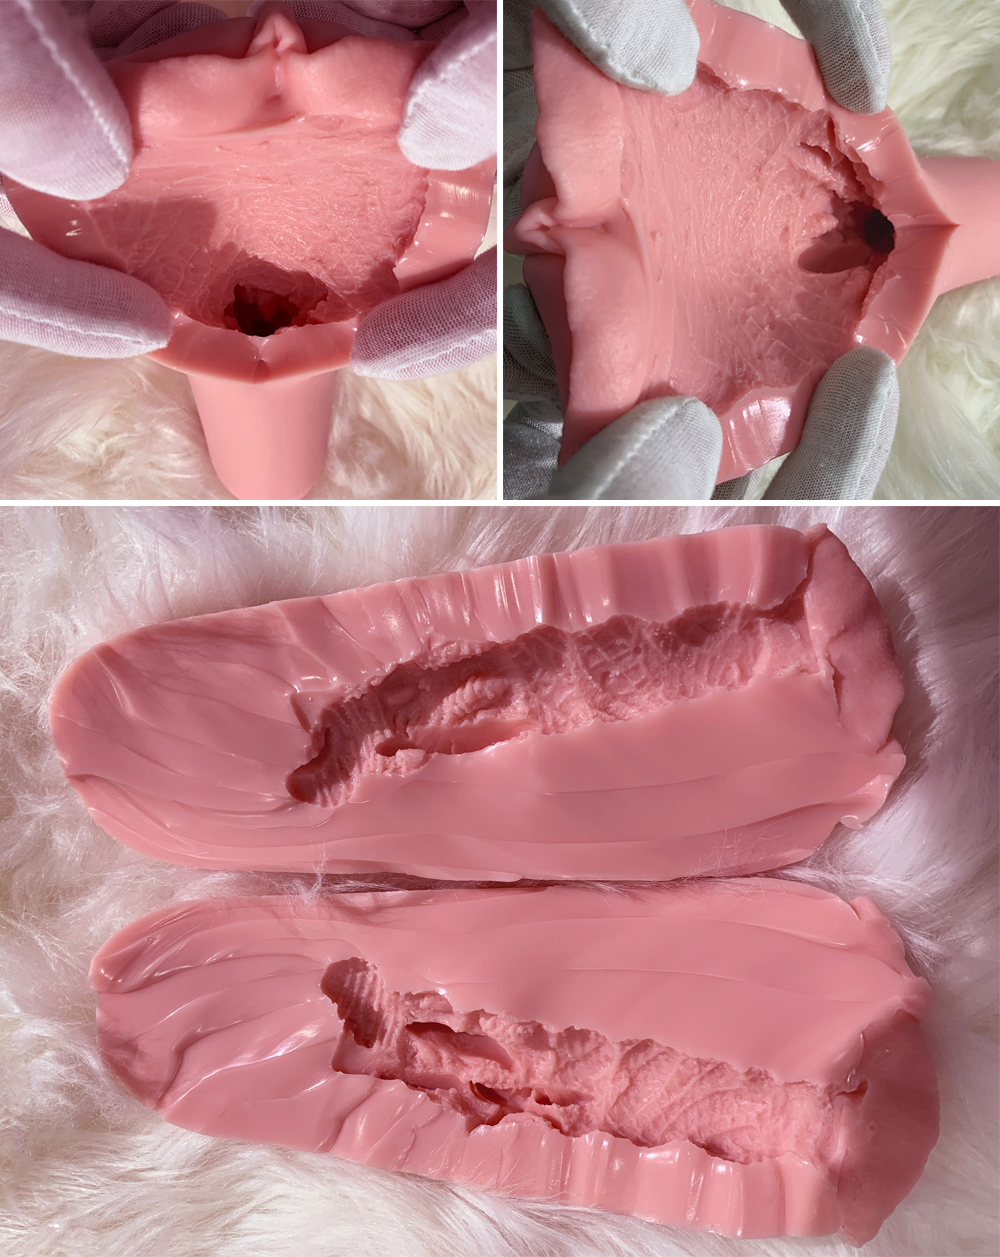 Gynoid Doll RZR|Realistic Silicone Sex Doll|Vagina cavity|Inside structure of vagina cavity|M10:12cm